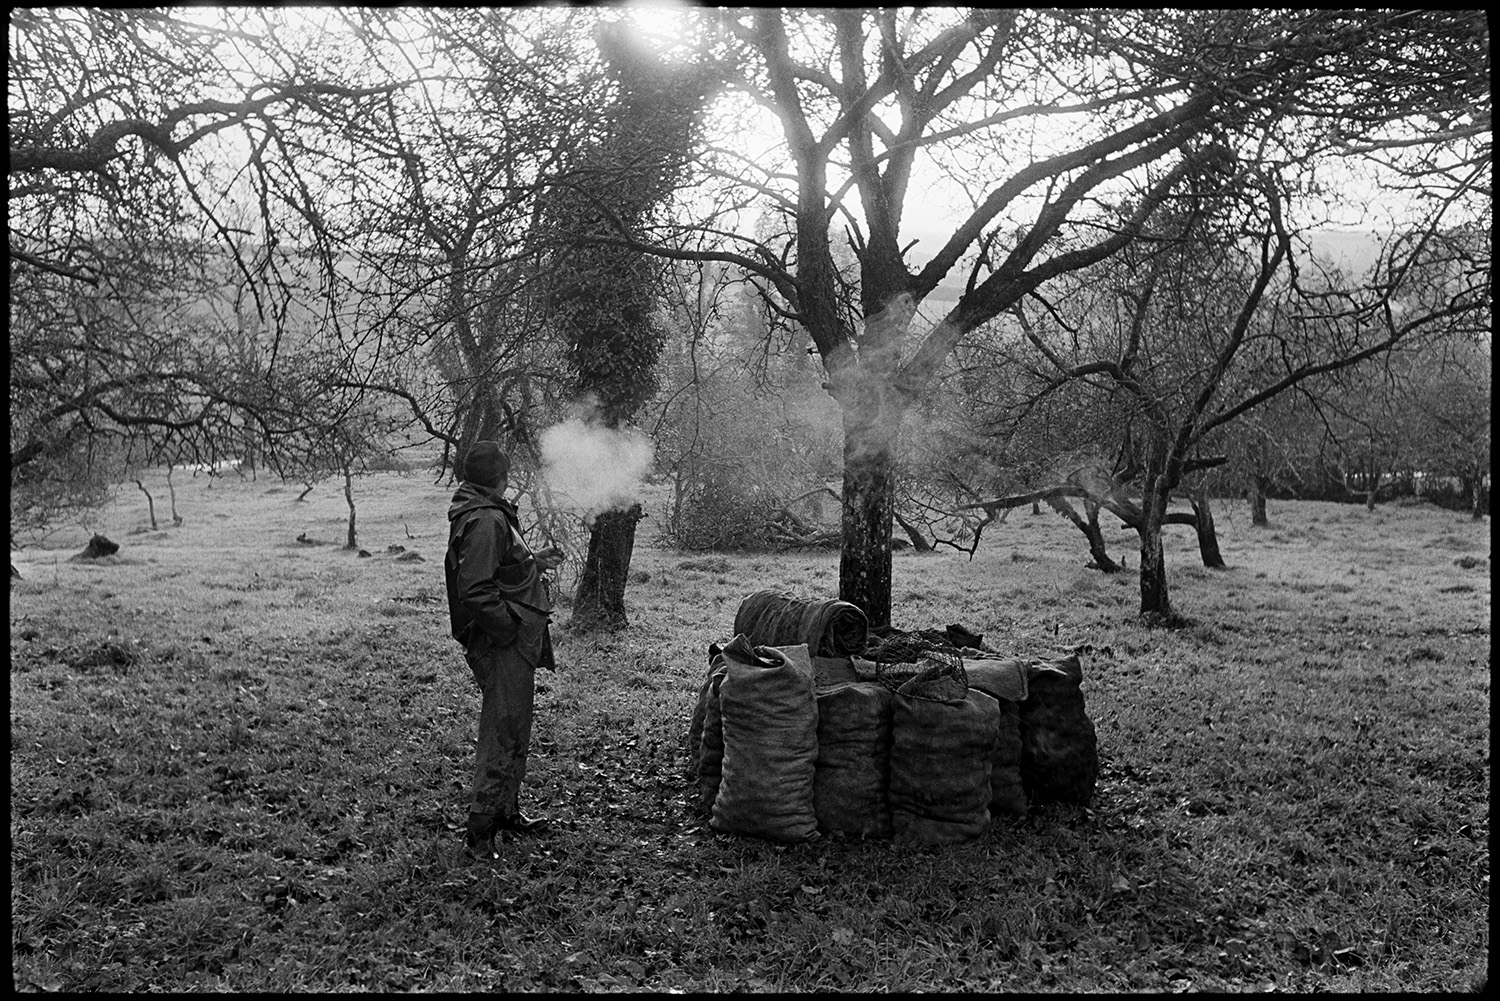 Cider orchard, man picking up apples and bagging them up.
[A man standing in a cider orchard at Westpark, Iddesleigh, smoking a pipe. There are full sacks of apples stacked around a tree in the foreground.]